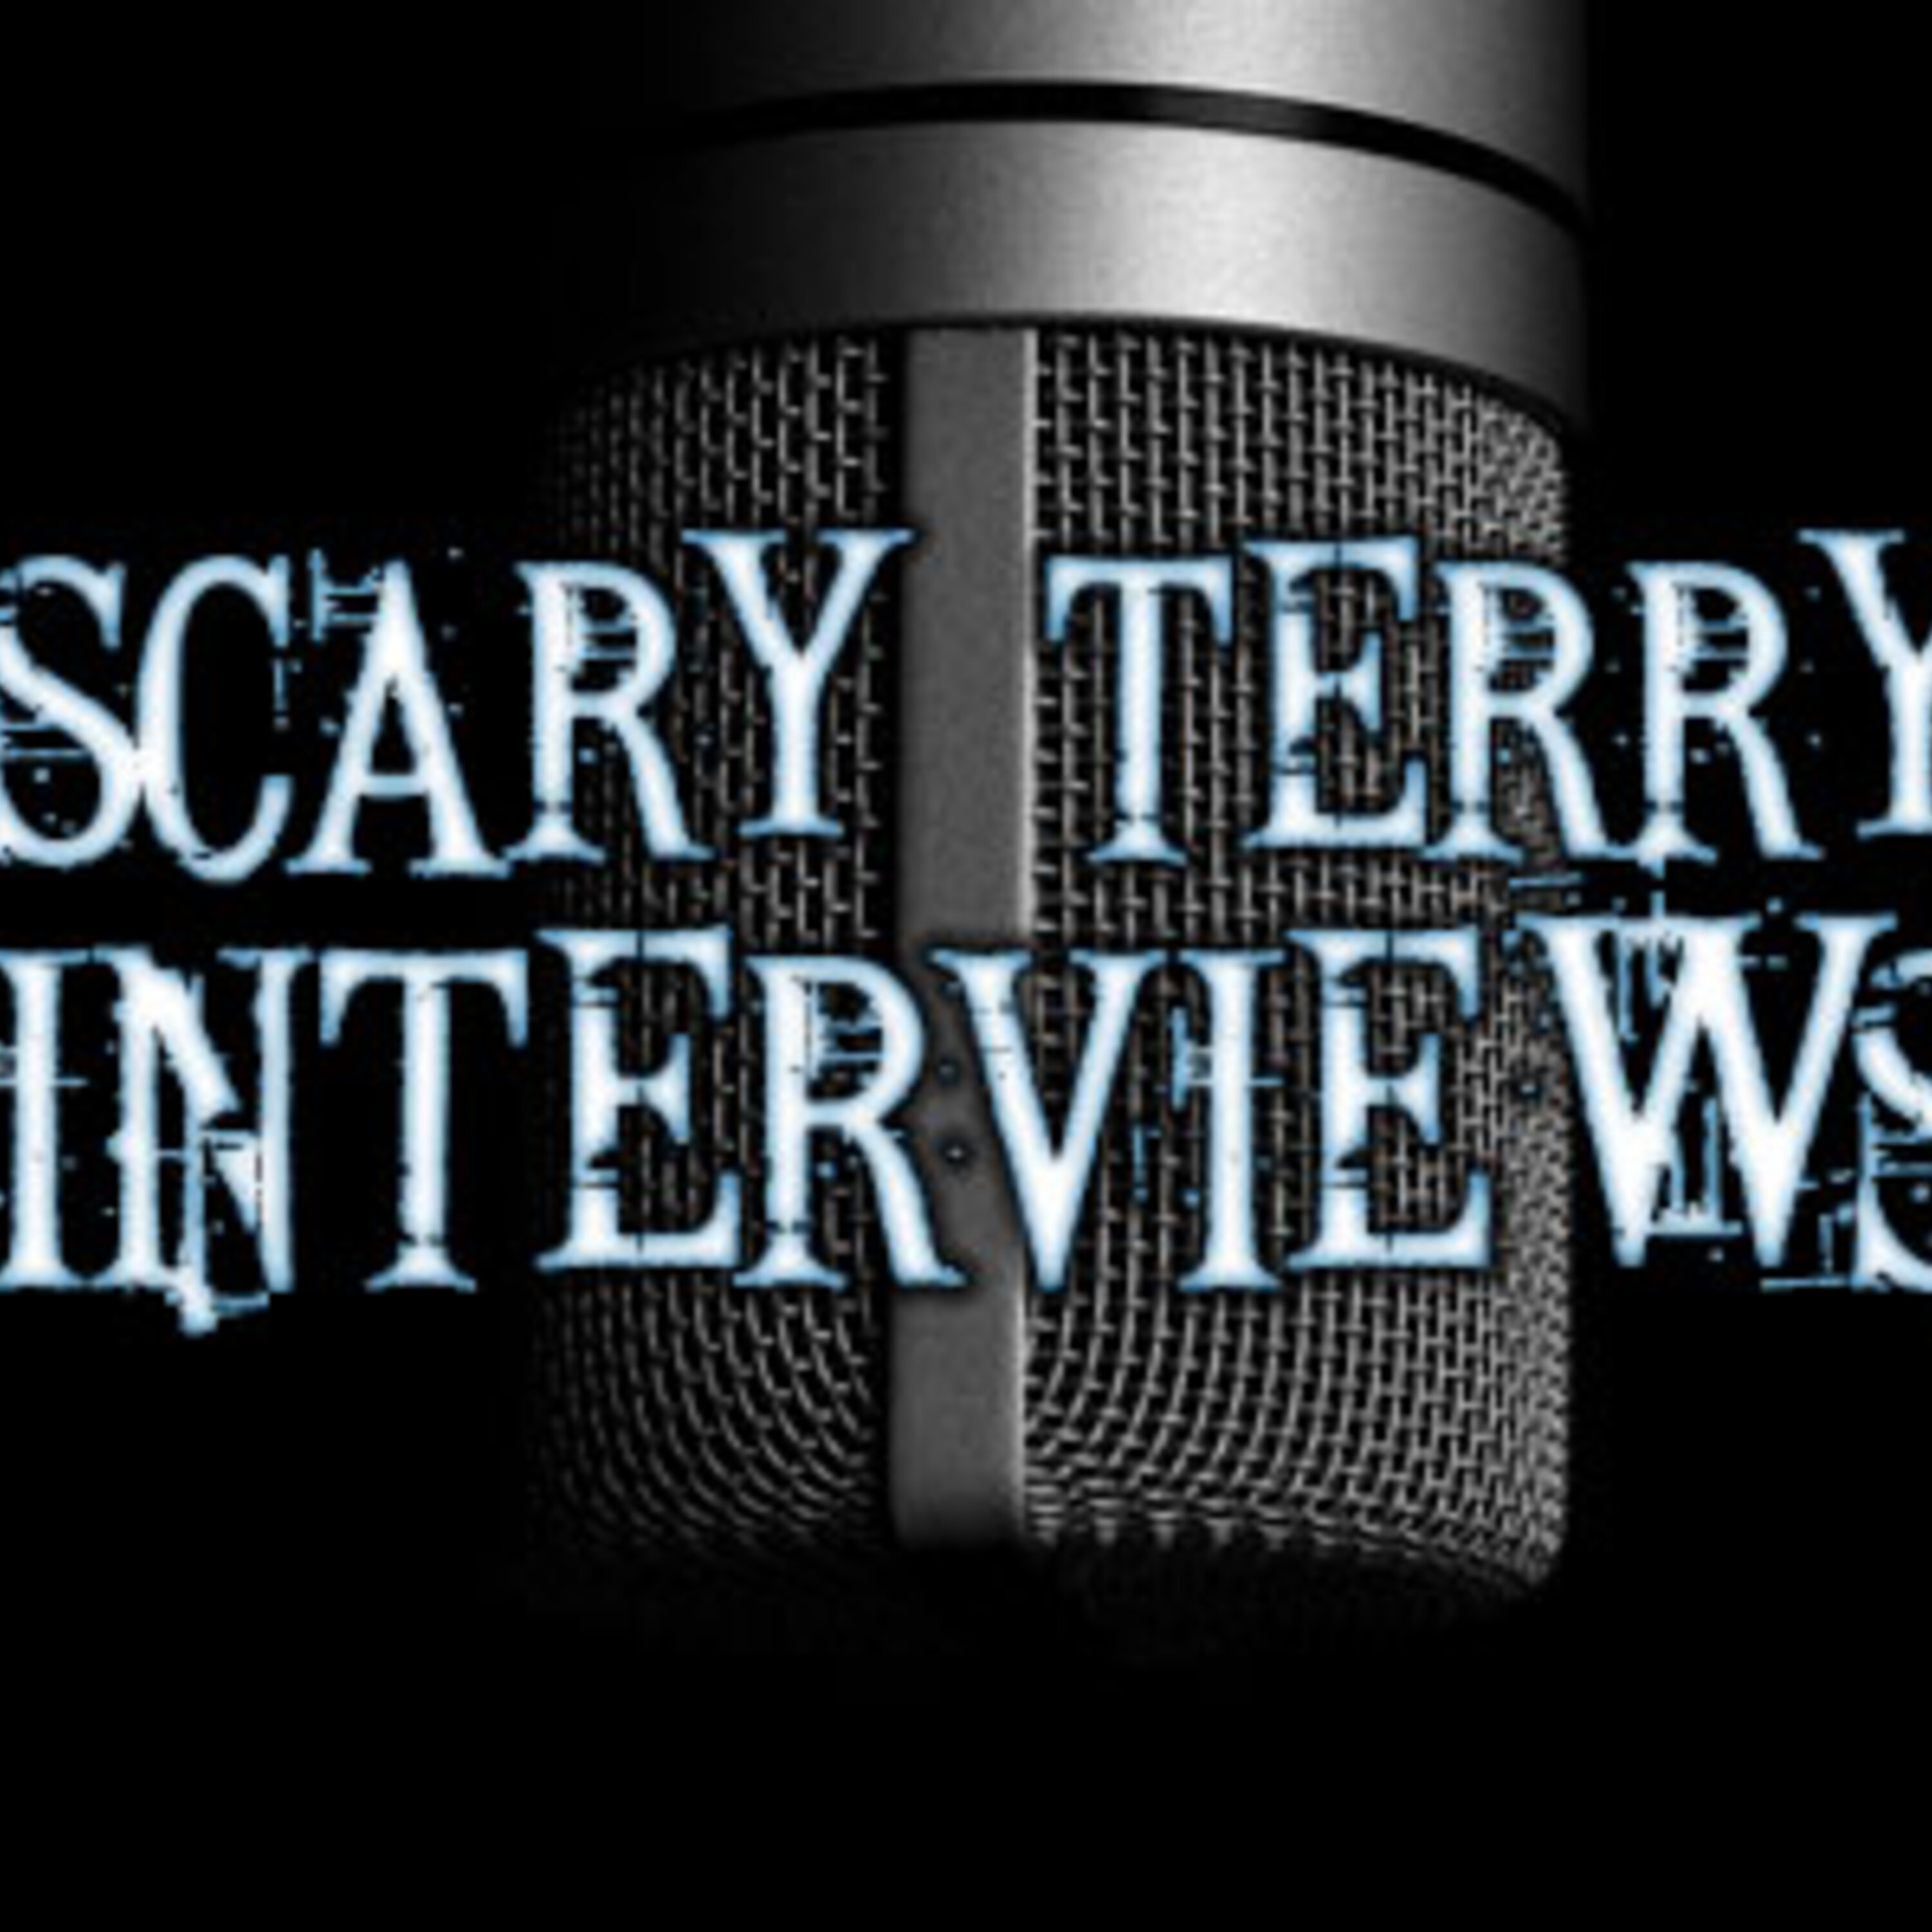 Scary Terry Interviews